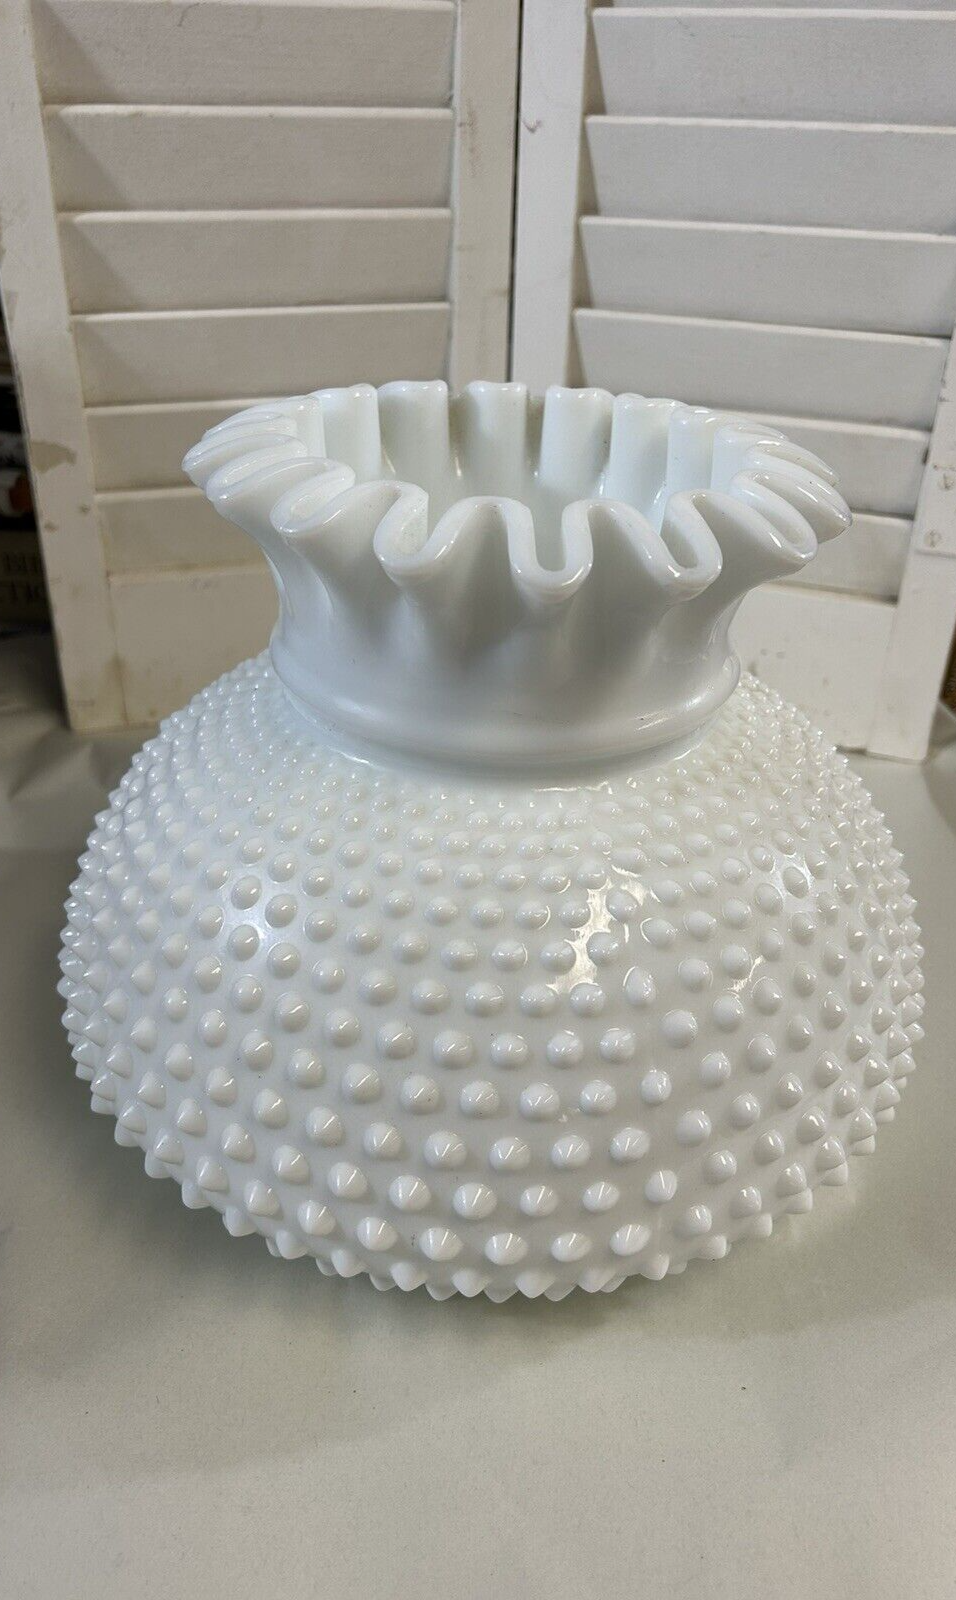 Vintage Milk Glass Lamp Shade Replacement Fenton Hobnail Candy Ribbon Top Large - $64.35